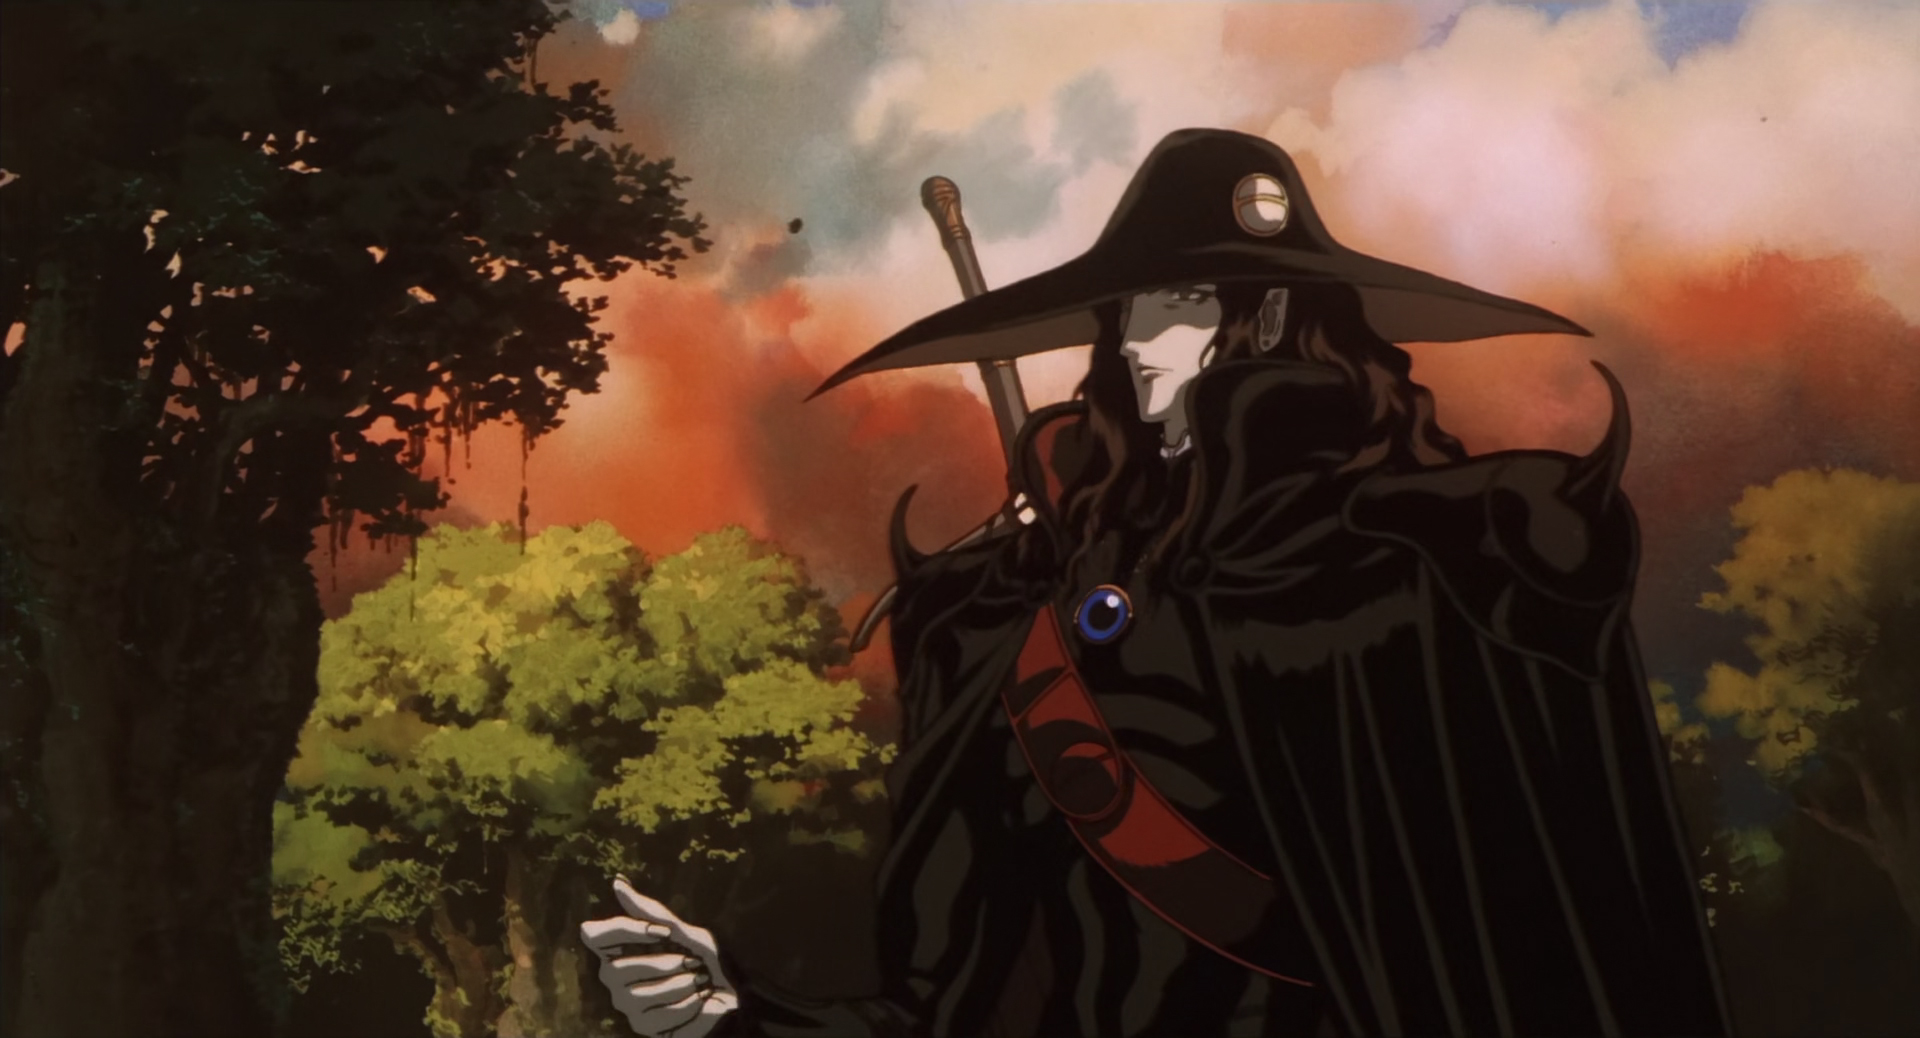 Vampire Hunter D: Bloodlust, Kyle Marcus (Marcus brothers